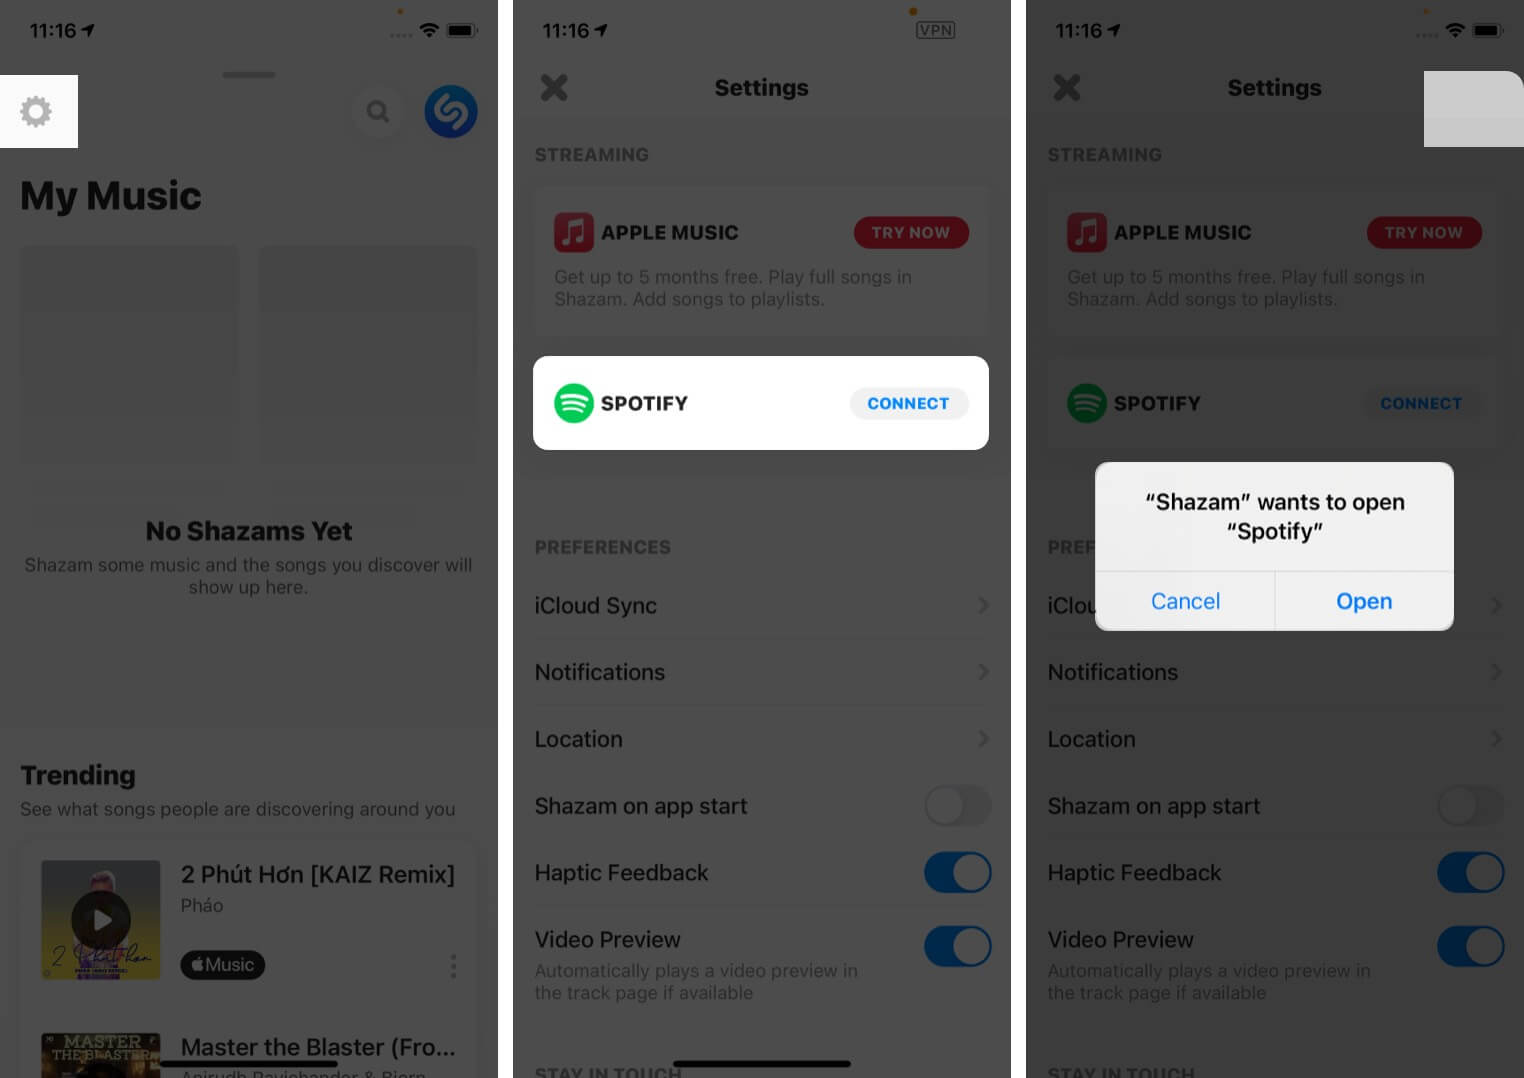 In Shazam app tap Settings icon and connect Spotify on iPhone